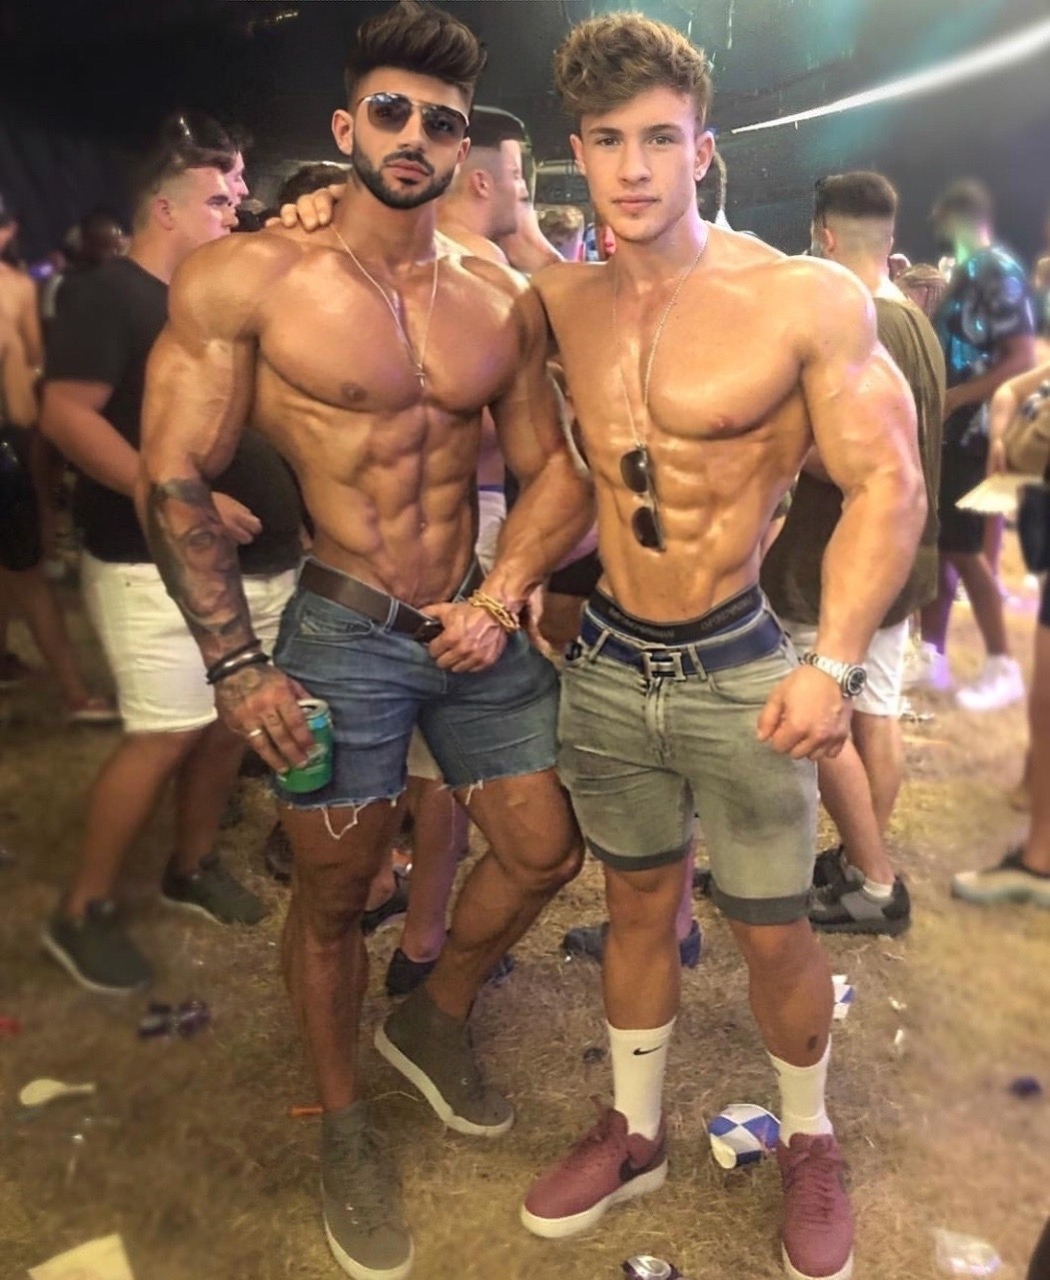 theadonisreview:The two most juiced alpha bros at the festival were on the prowl